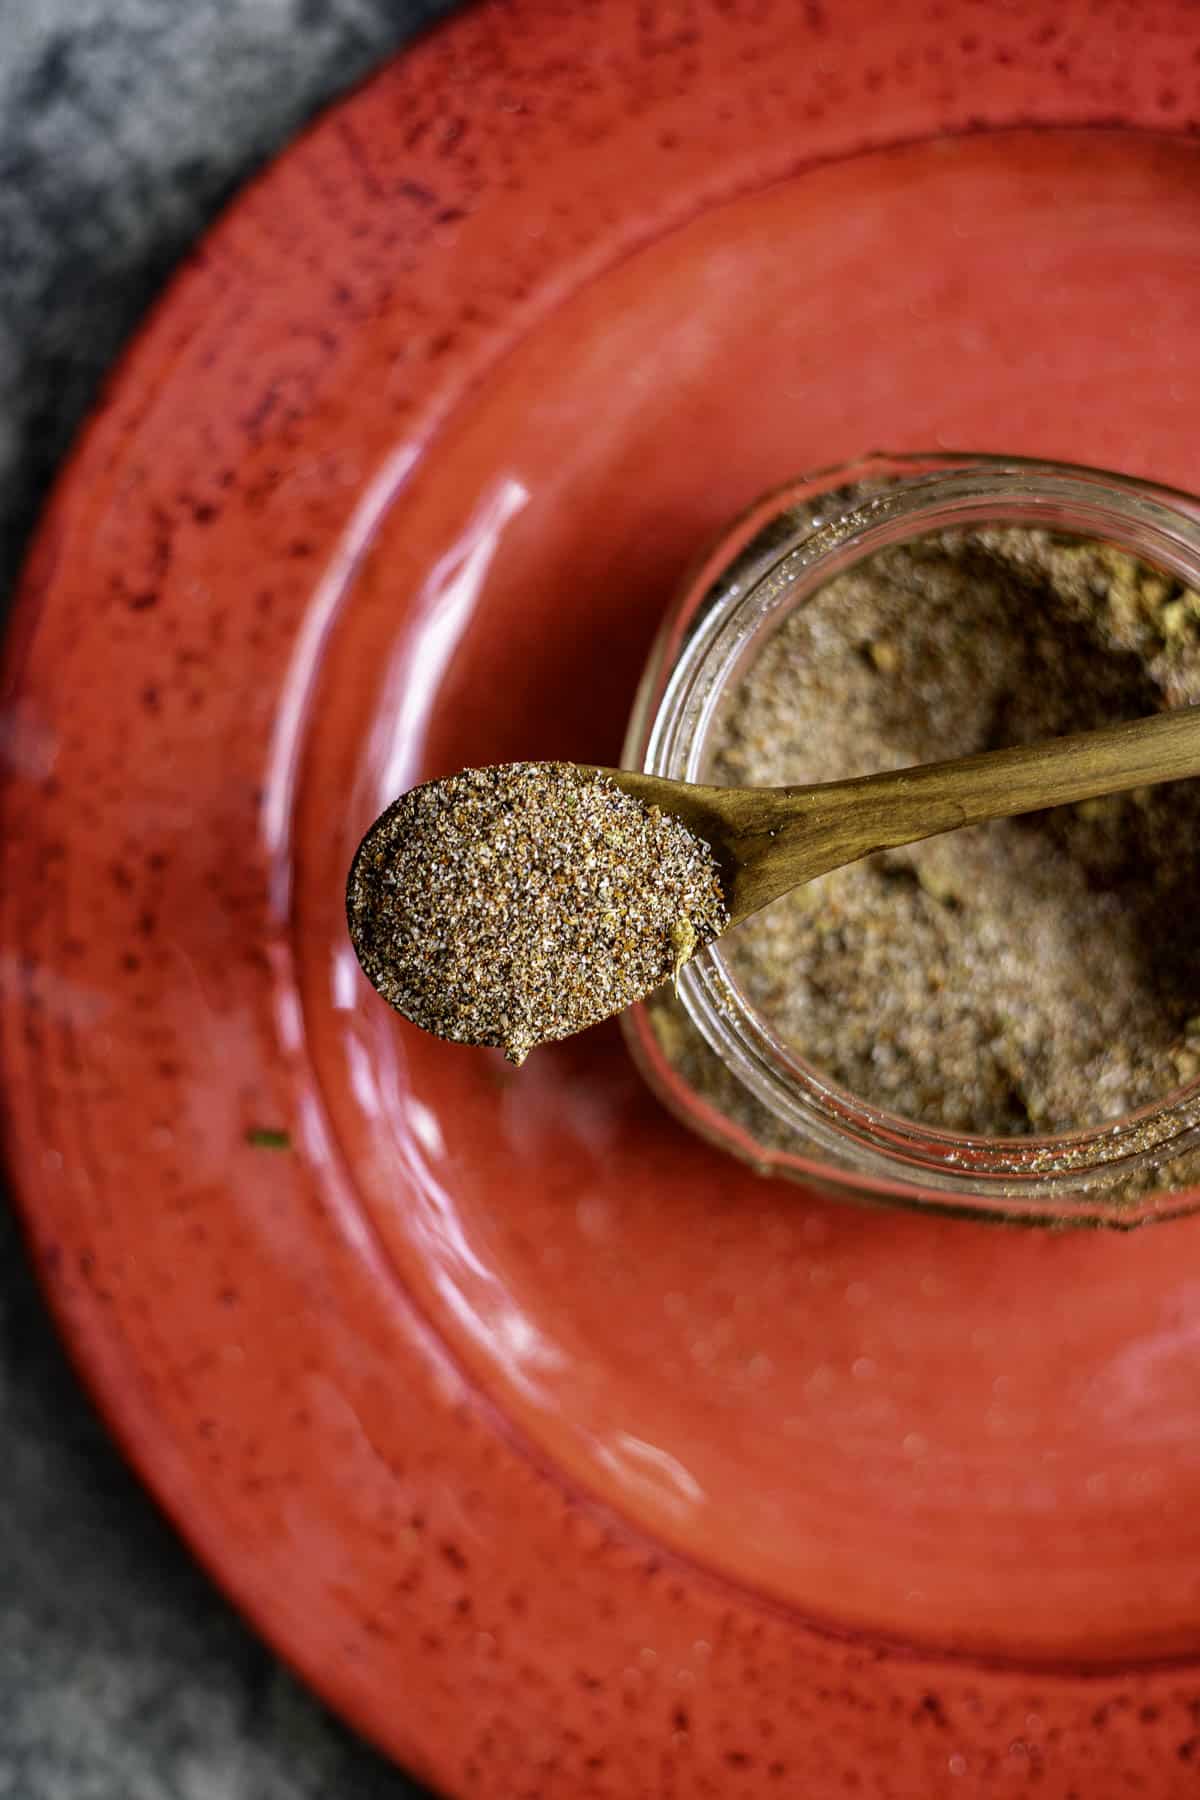 carne asada seasoning in a spoon over a jar on a red plate